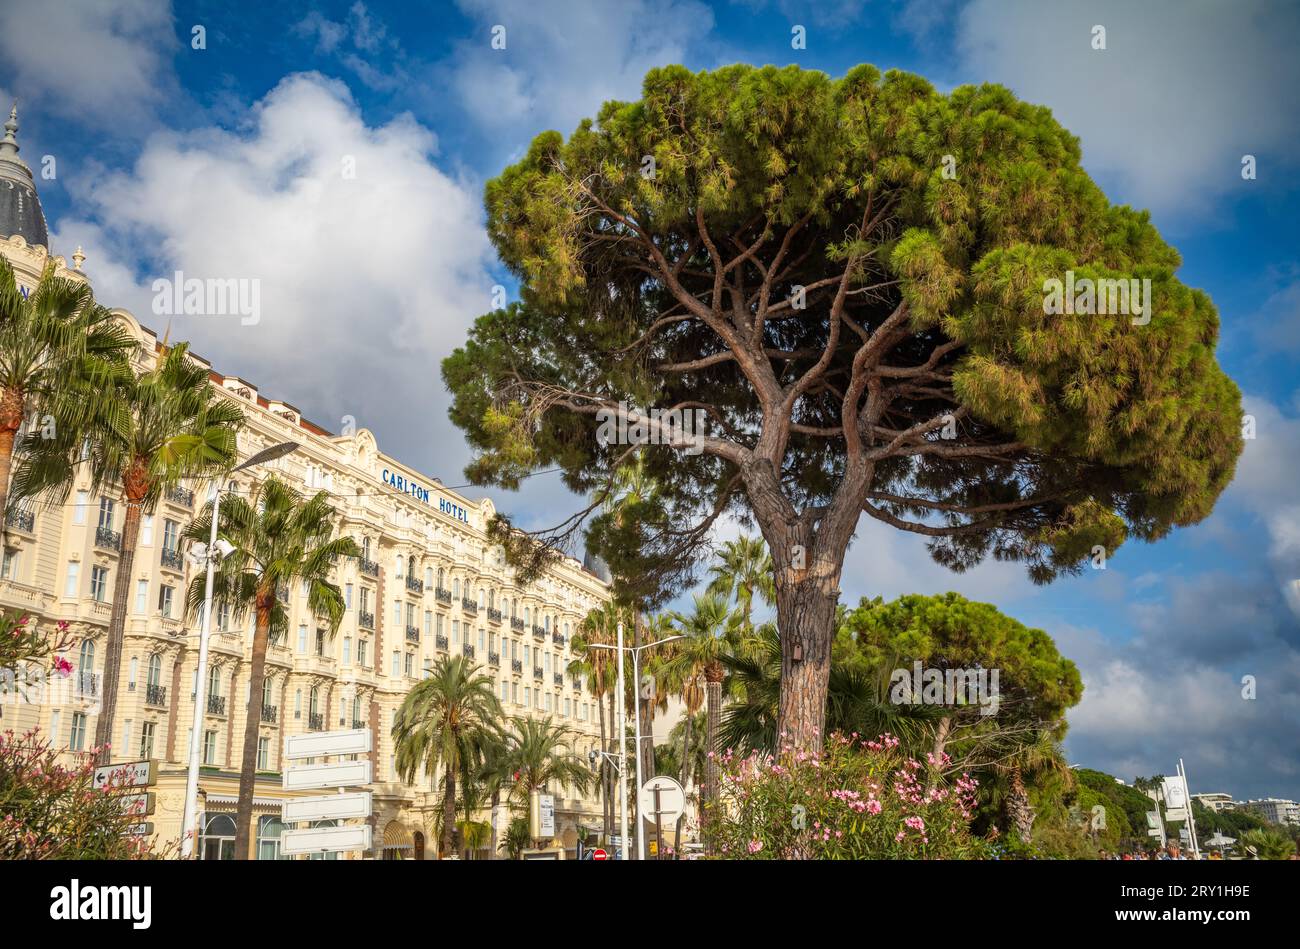 Aleppo pine (Pinus halepensis) trees outside the luxury Carlton Hotel in Cannes, France. One of the most iconic hotels on the French Riviera, it has h Stock Photo